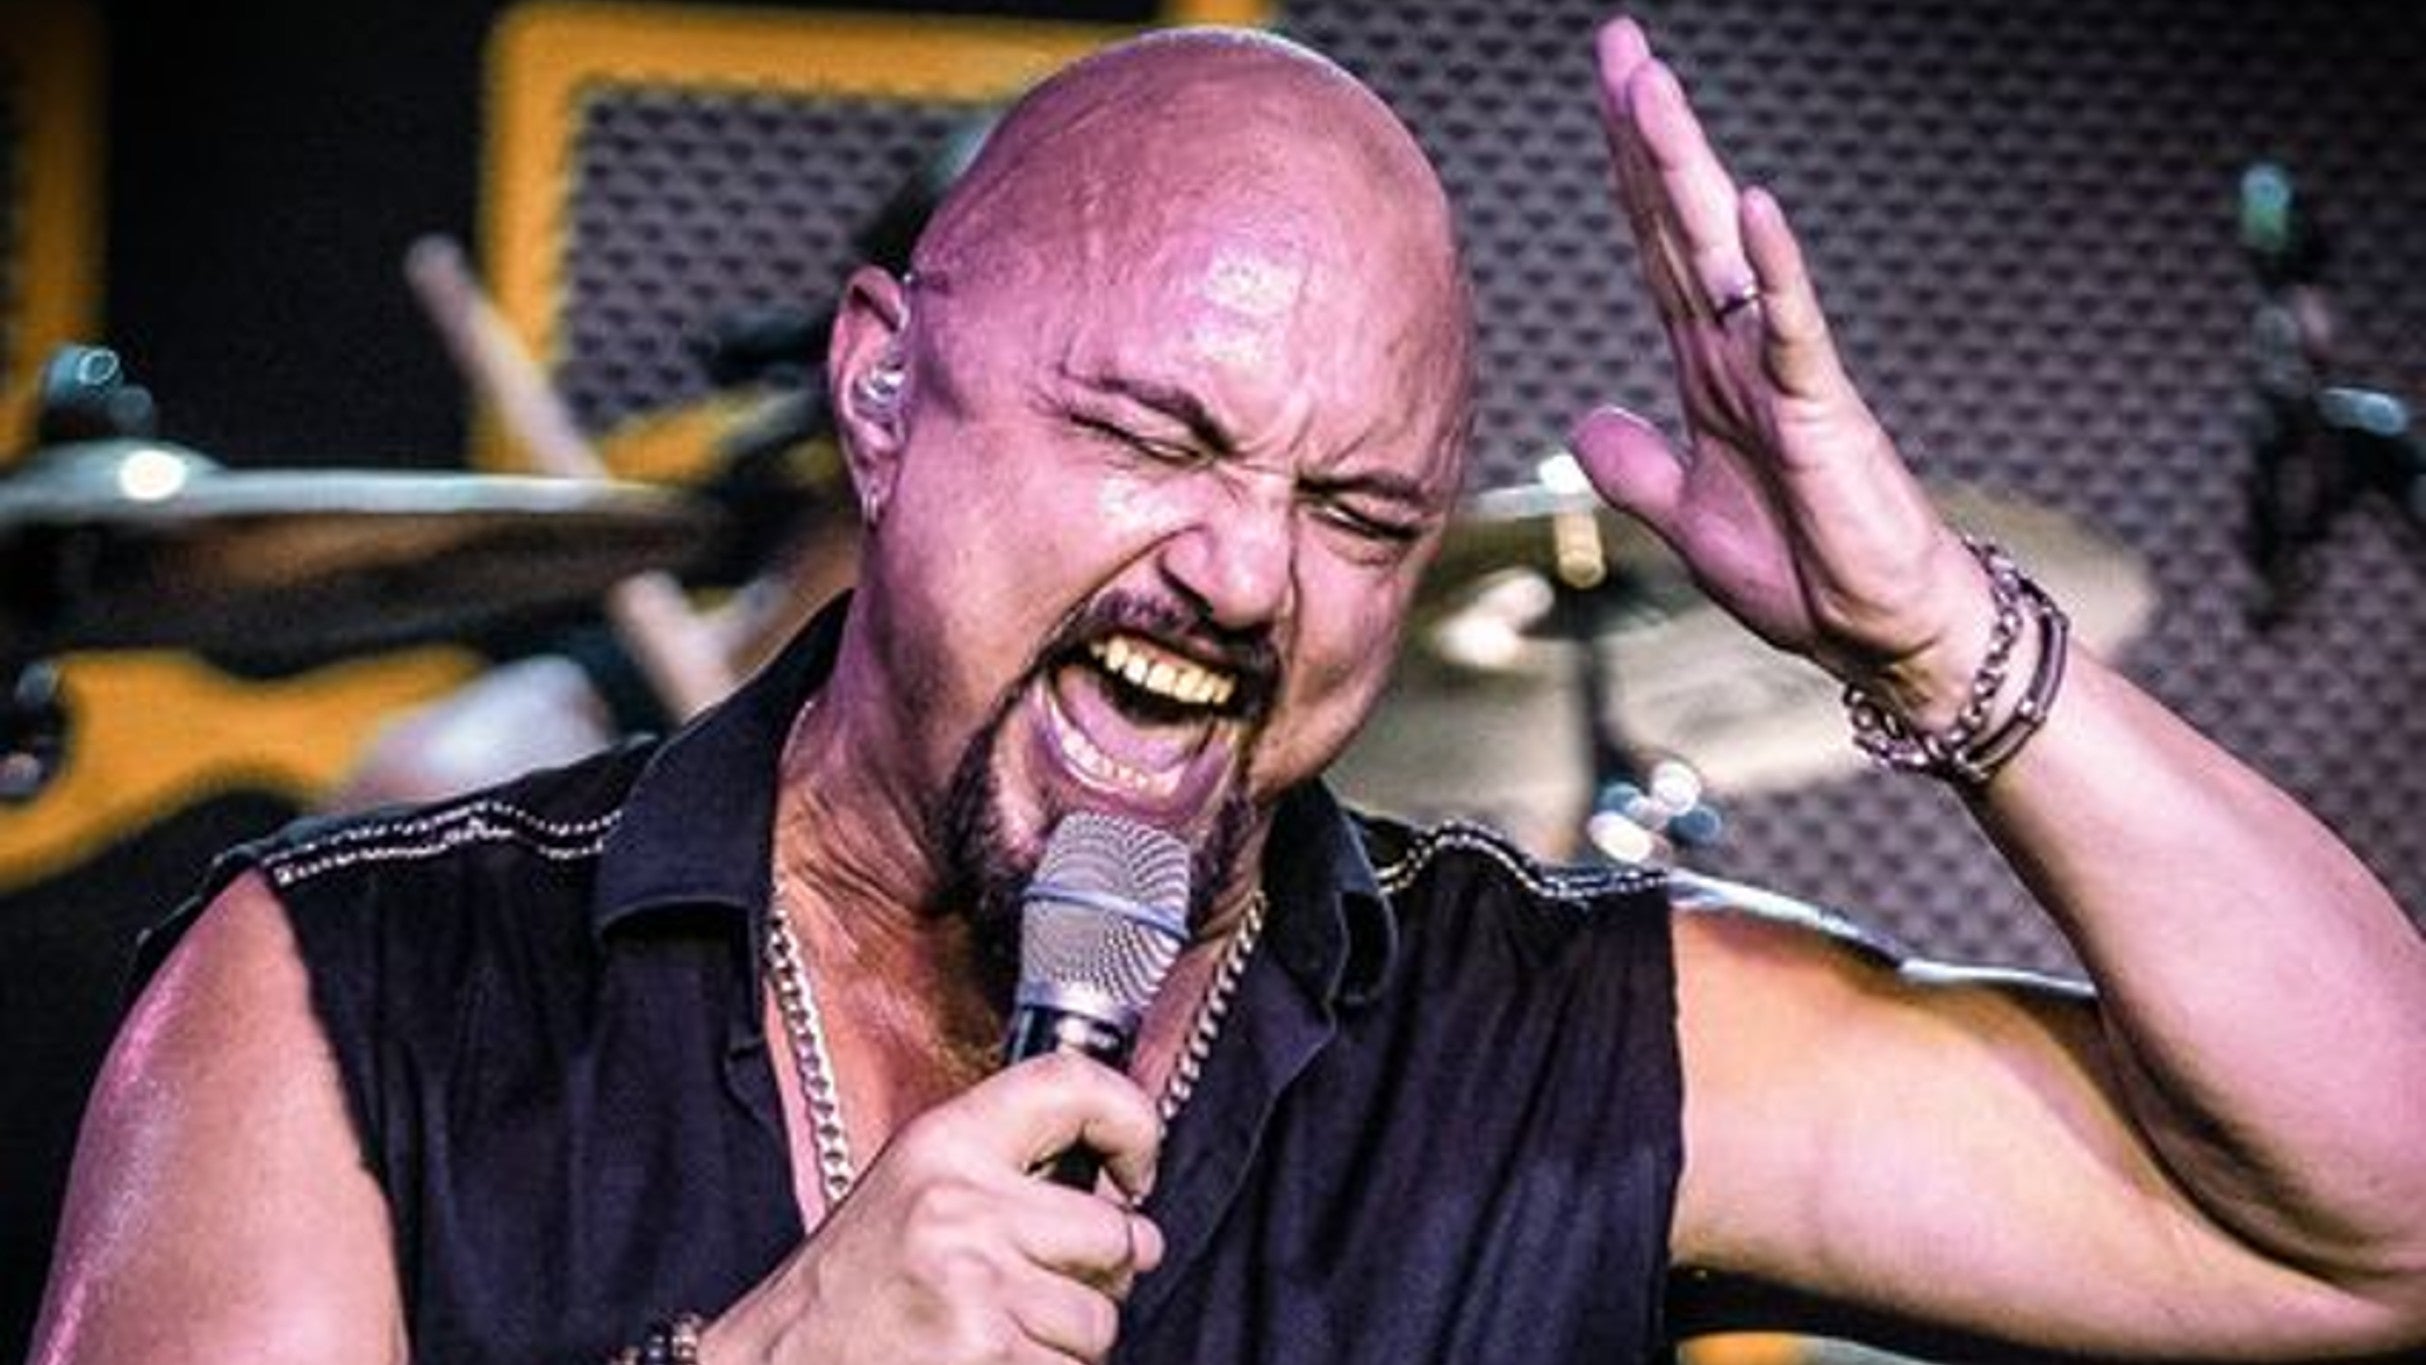 Geoff Tate at The Canyon-Montclair